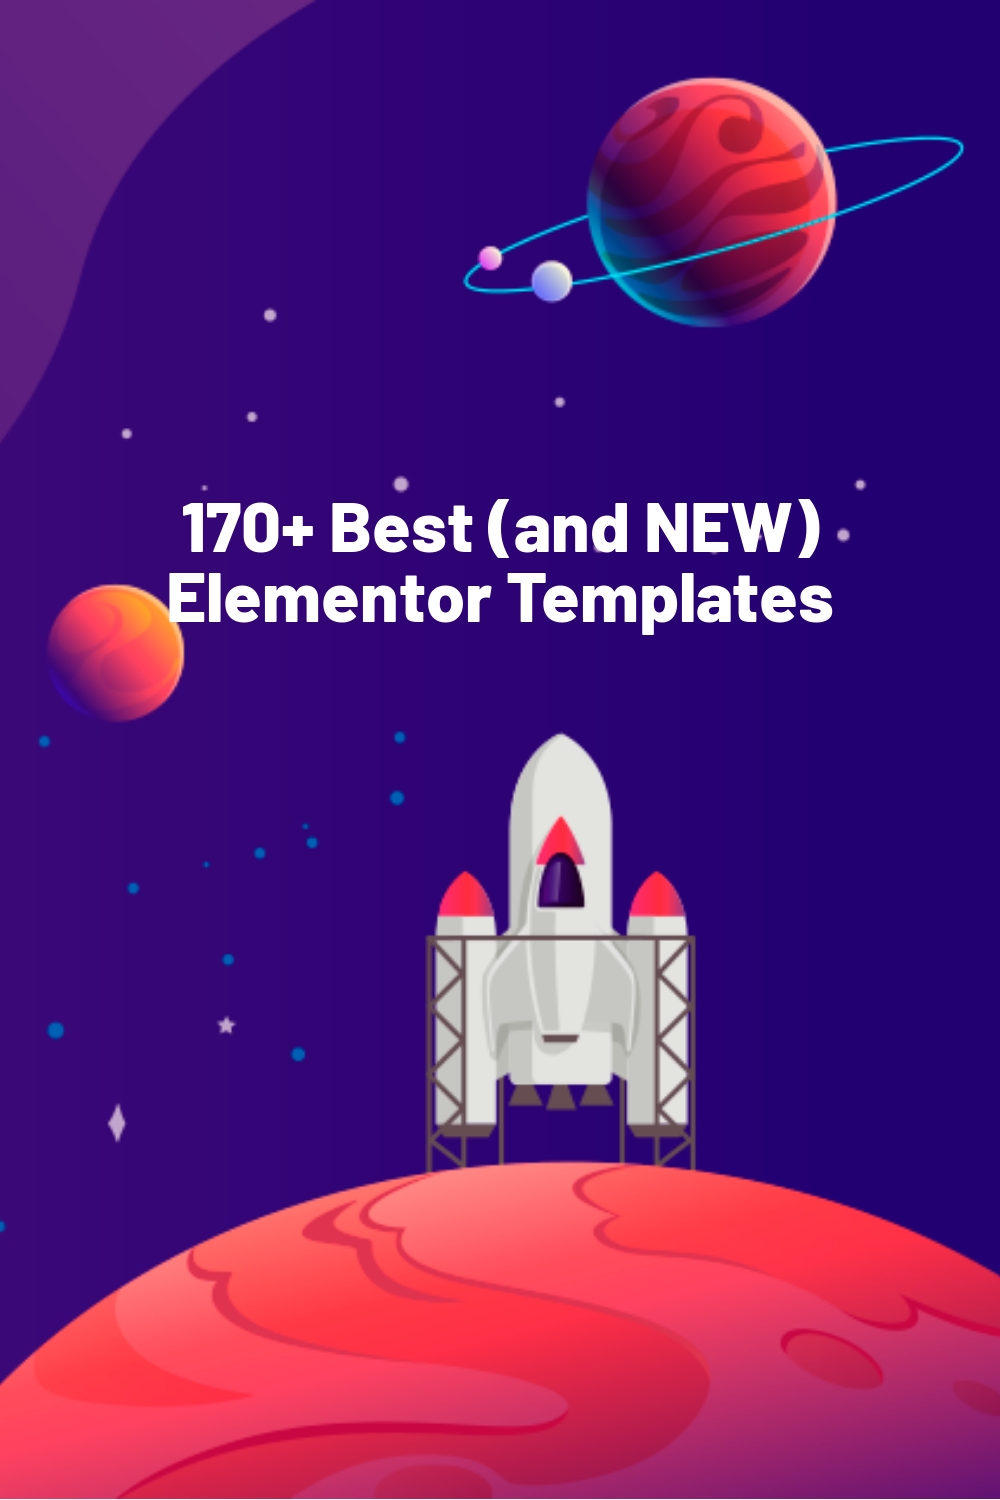 170+ Best (and NEW) Elementor Templates